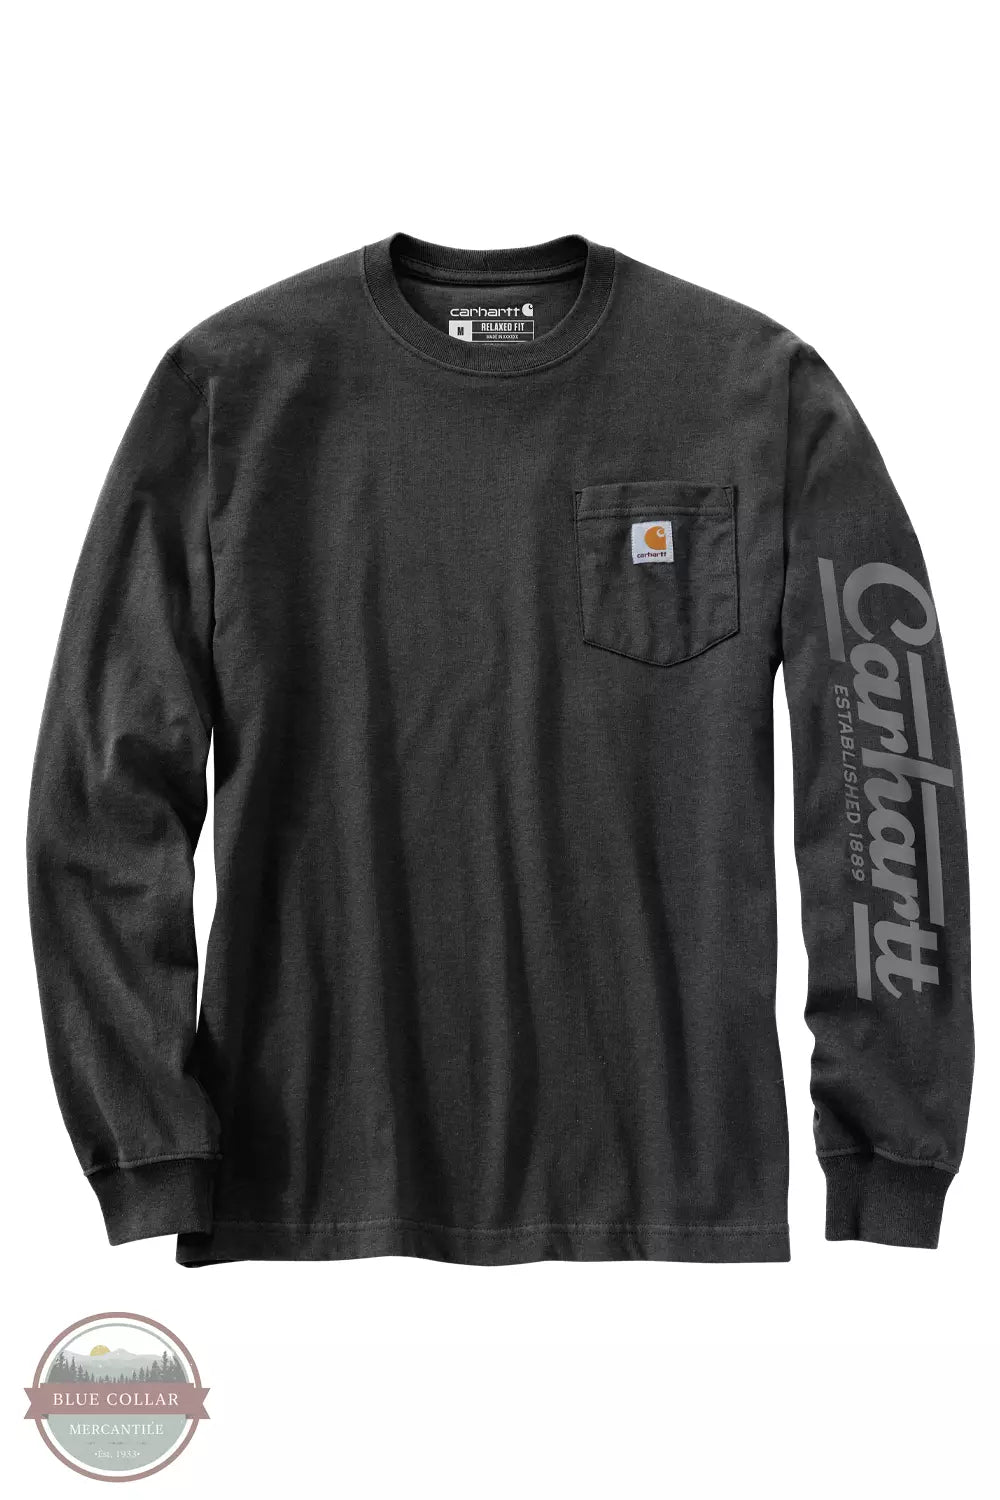 Carhartt 106041 Relaxed Fit Heavyweight Pocket Long Sleeve T-Shirt Carbon Heather Front View